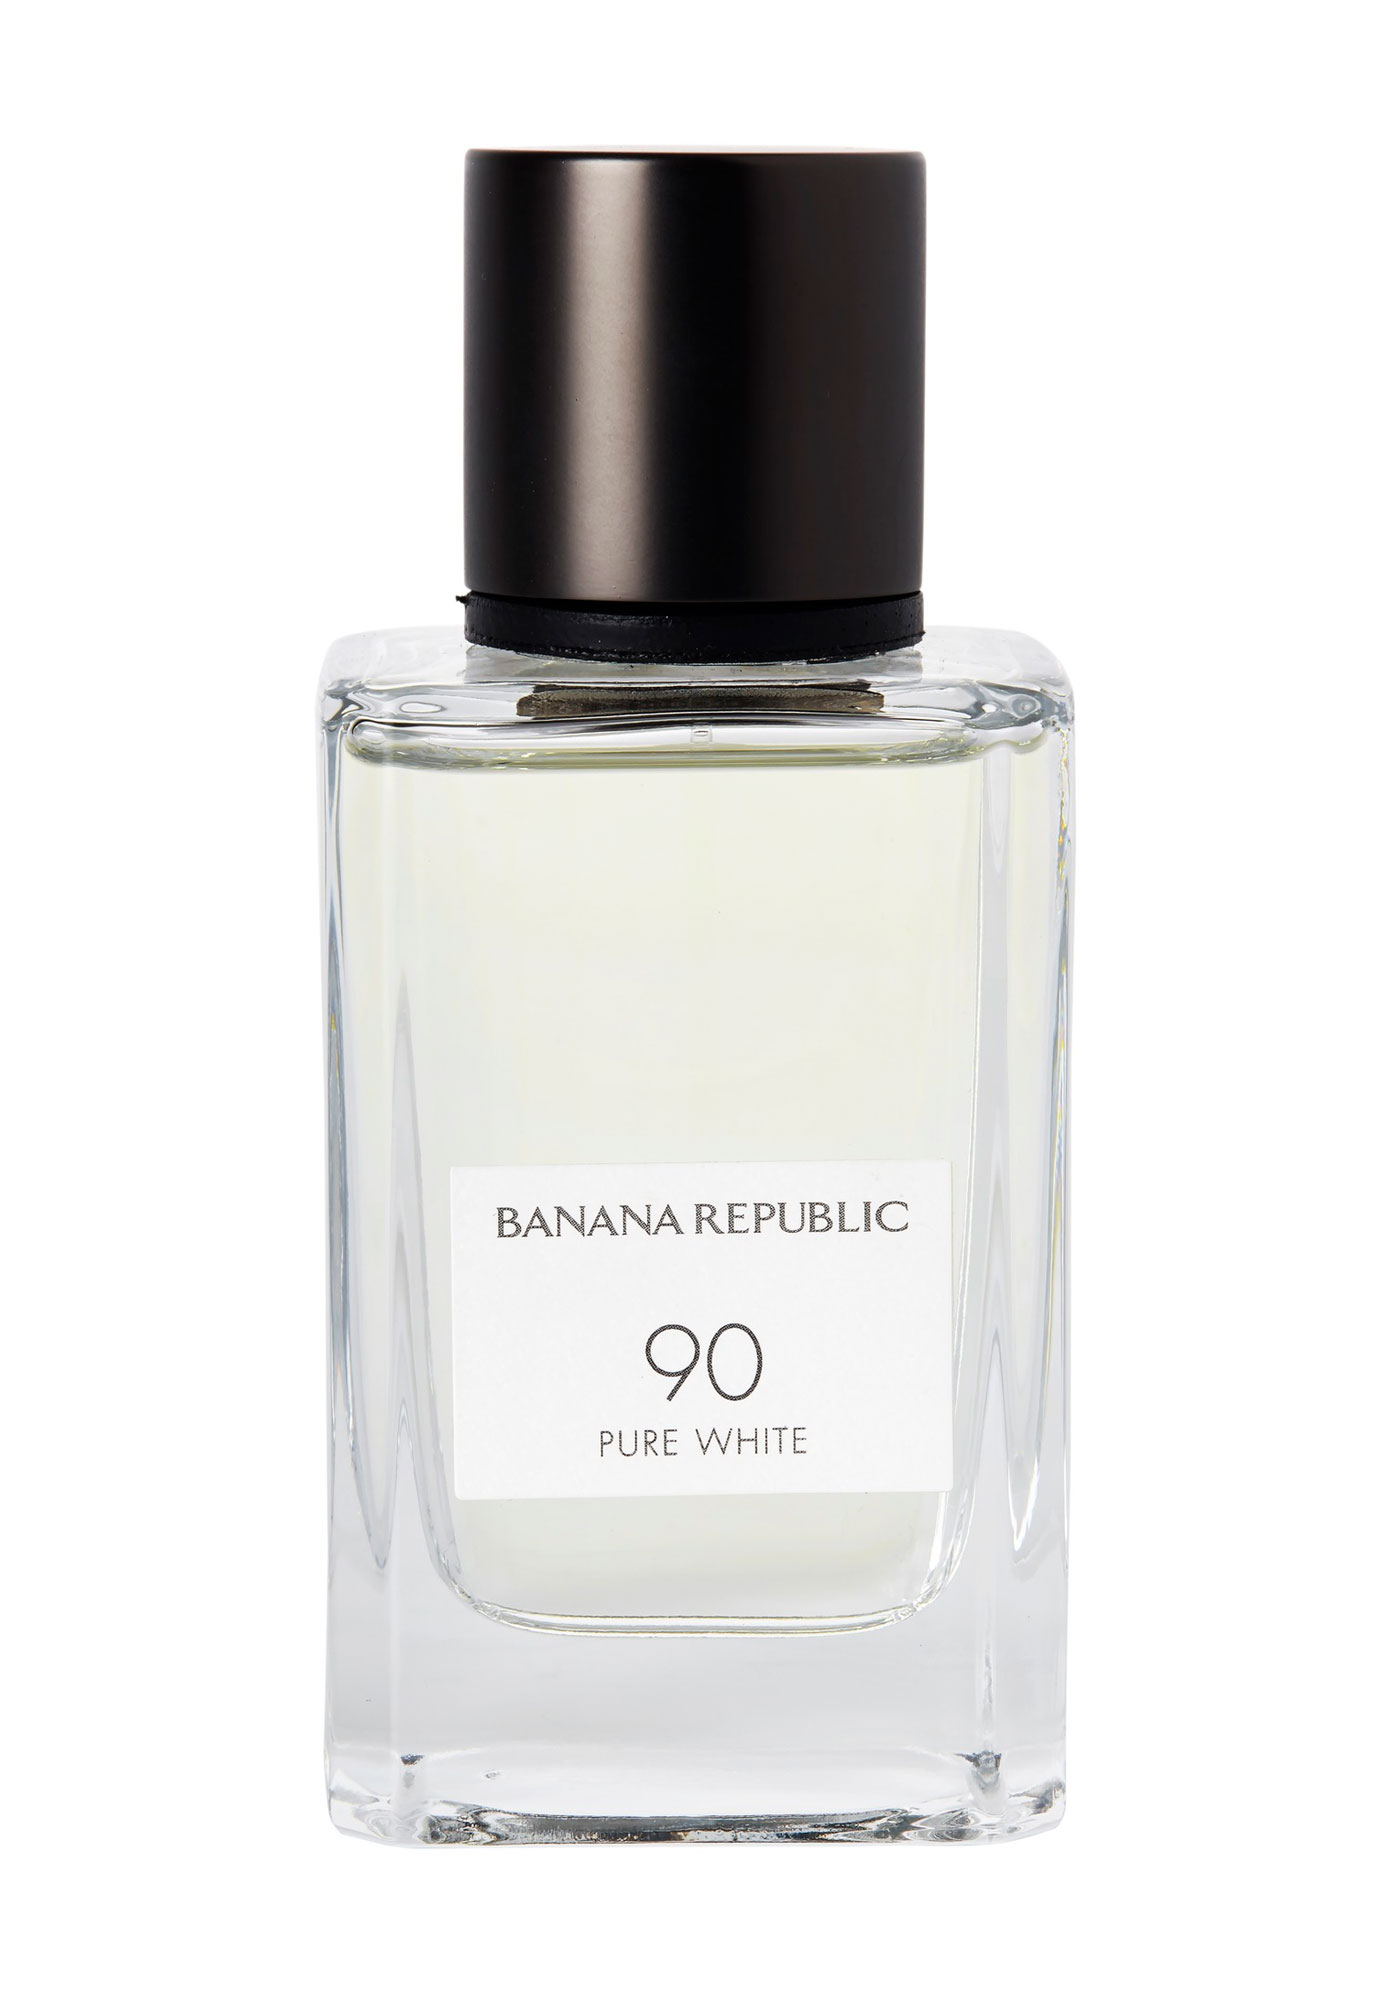 90 Pure White Banana Republic perfume - a new fragrance for women and